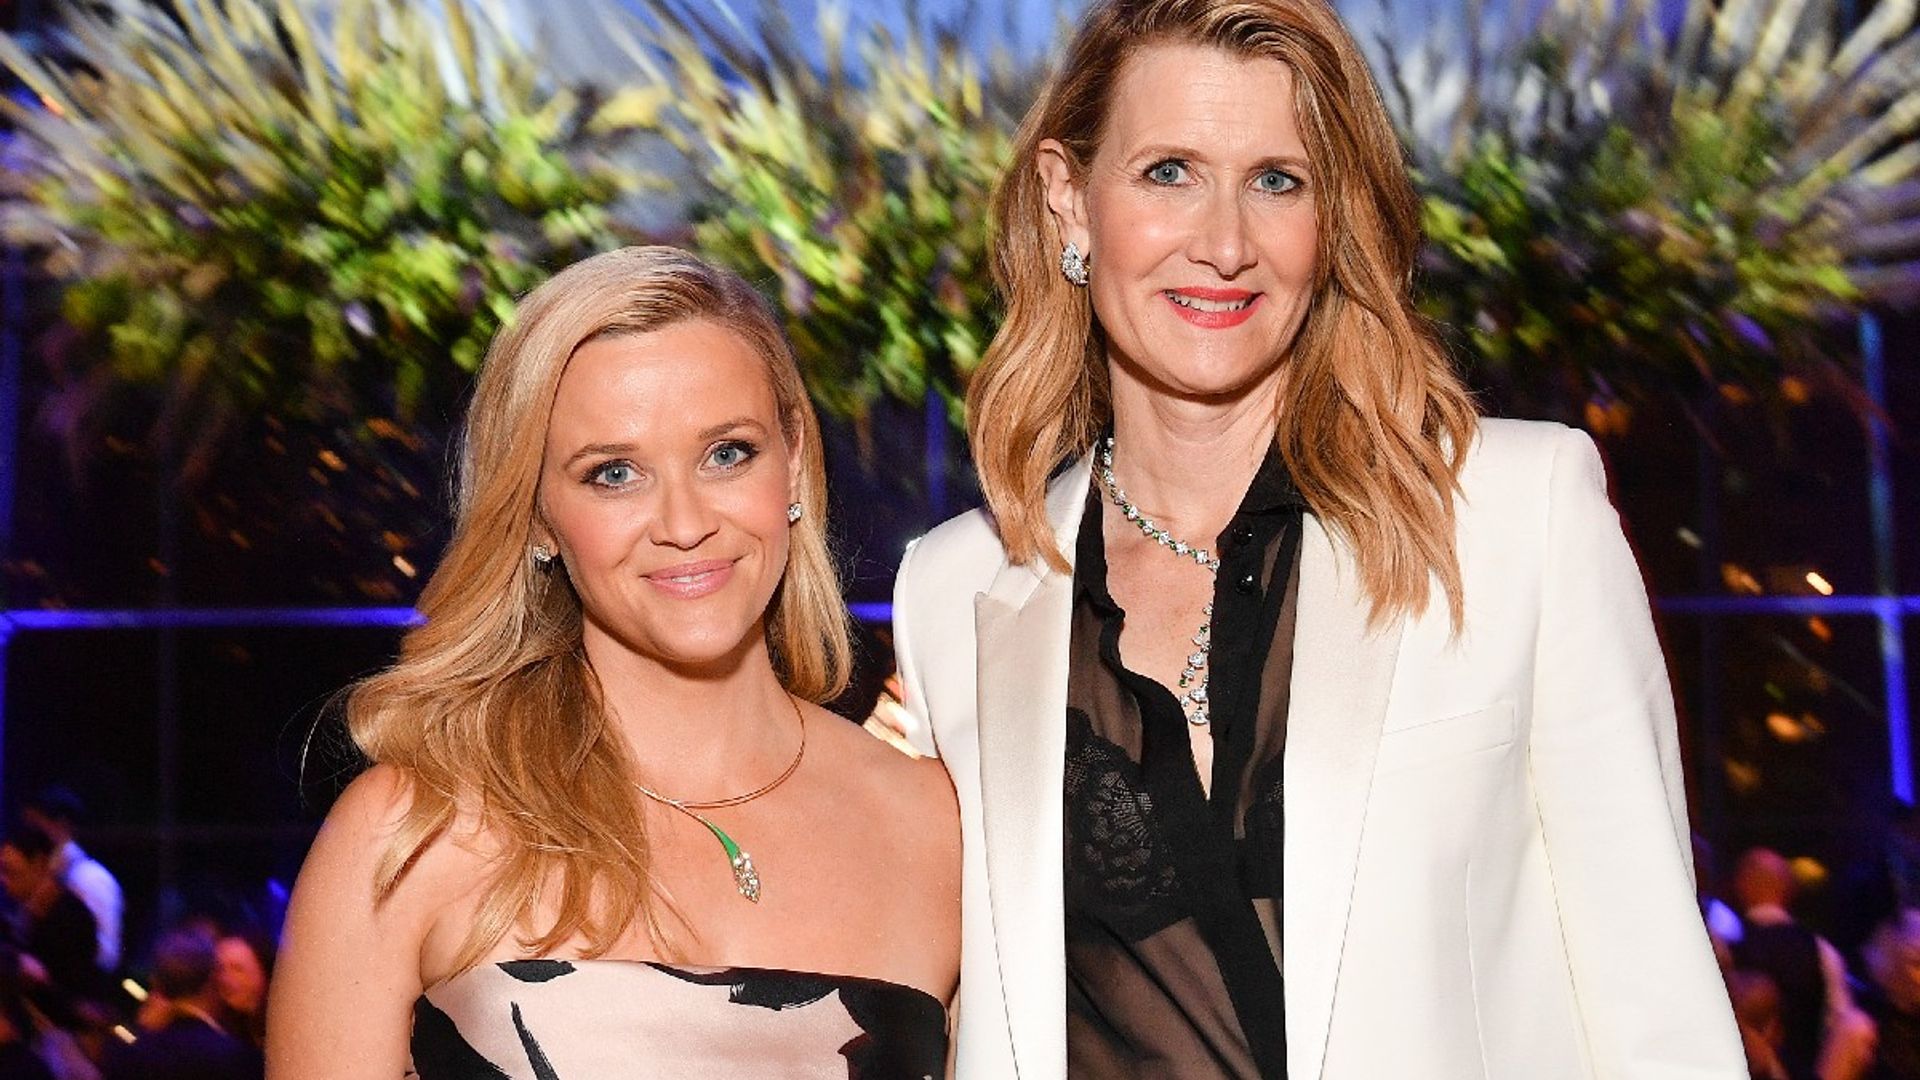 Reese Witherspoon goes out with Big Little Lies co-star Laura Dern